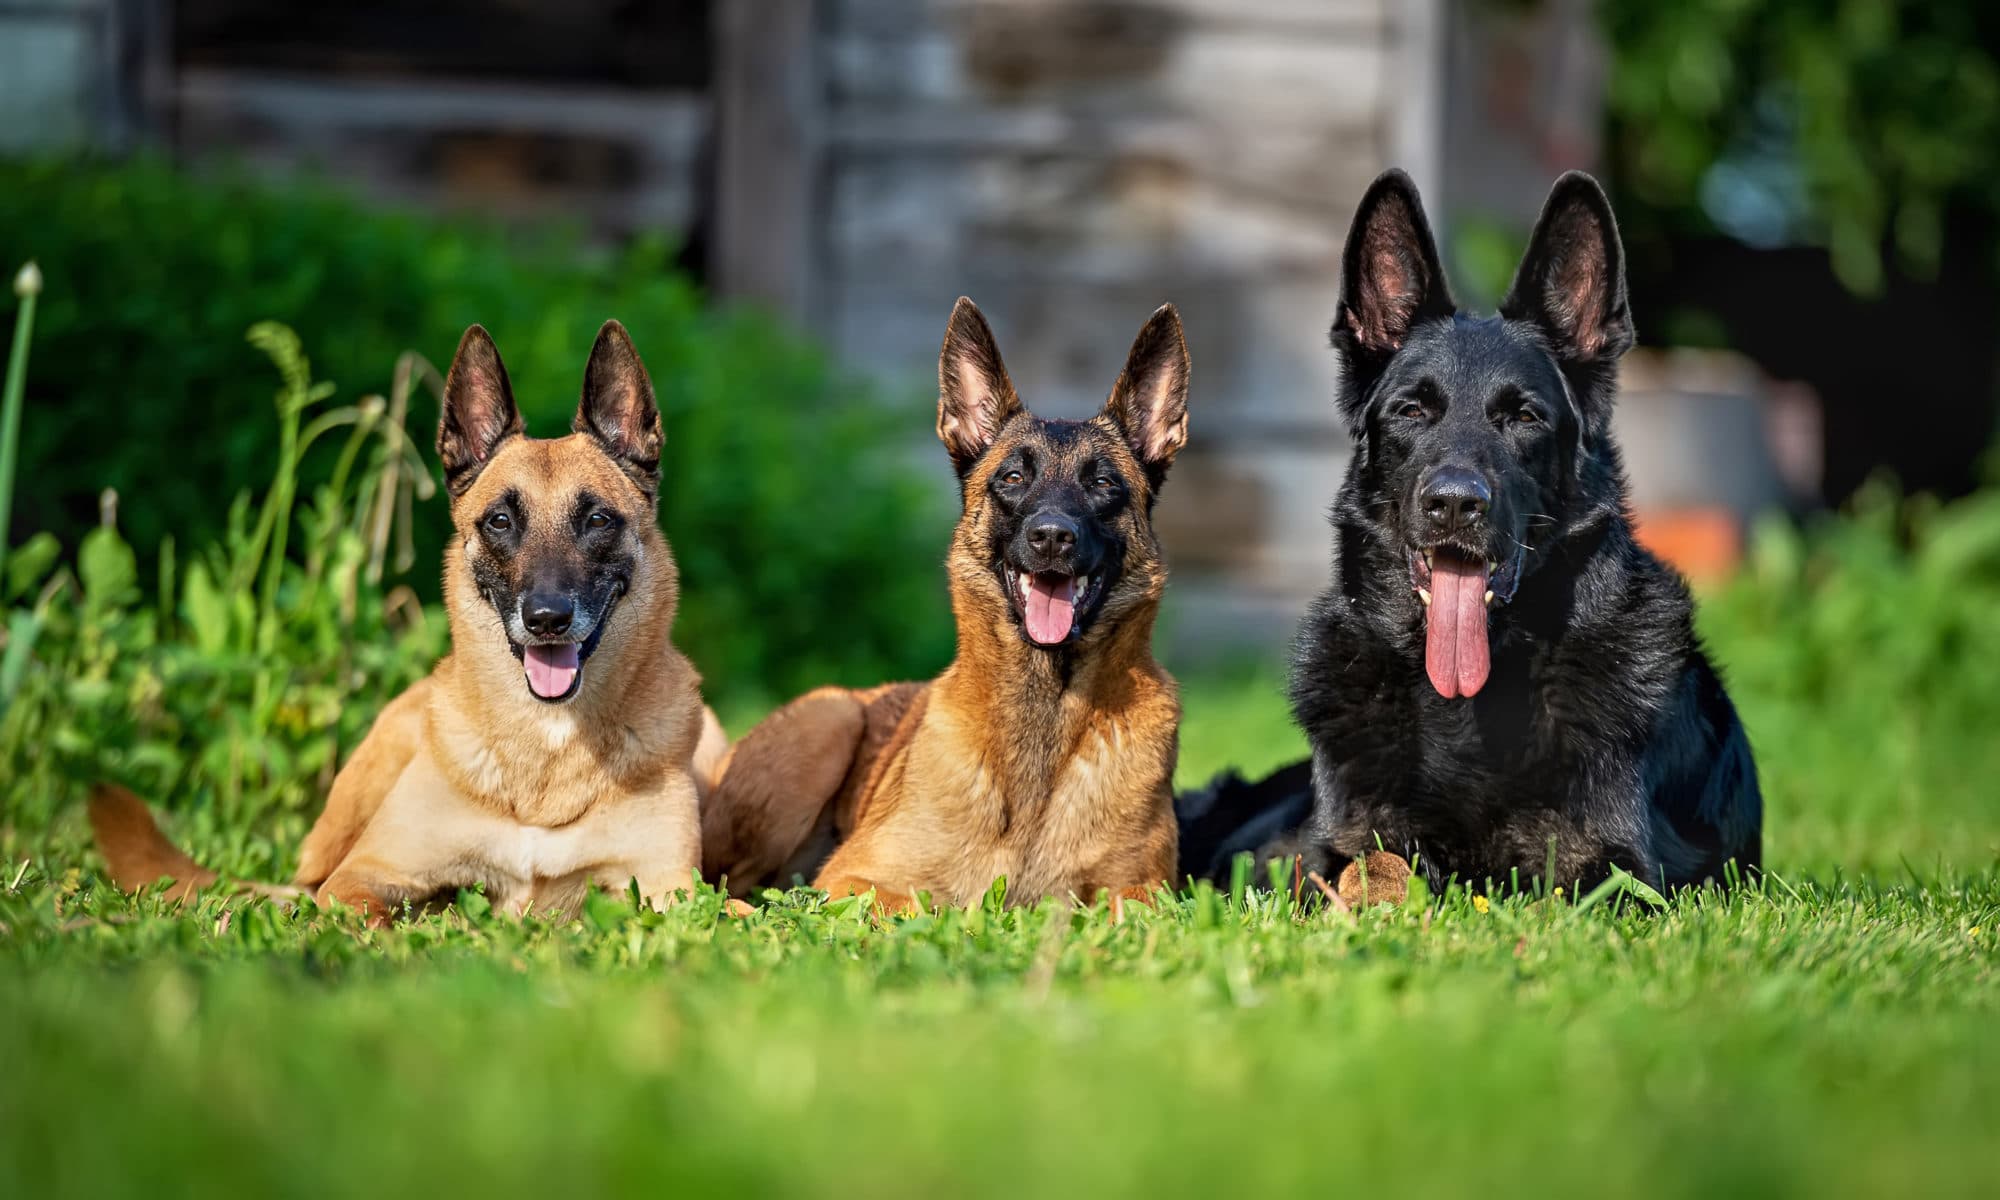 Why do German Shepherds whine?